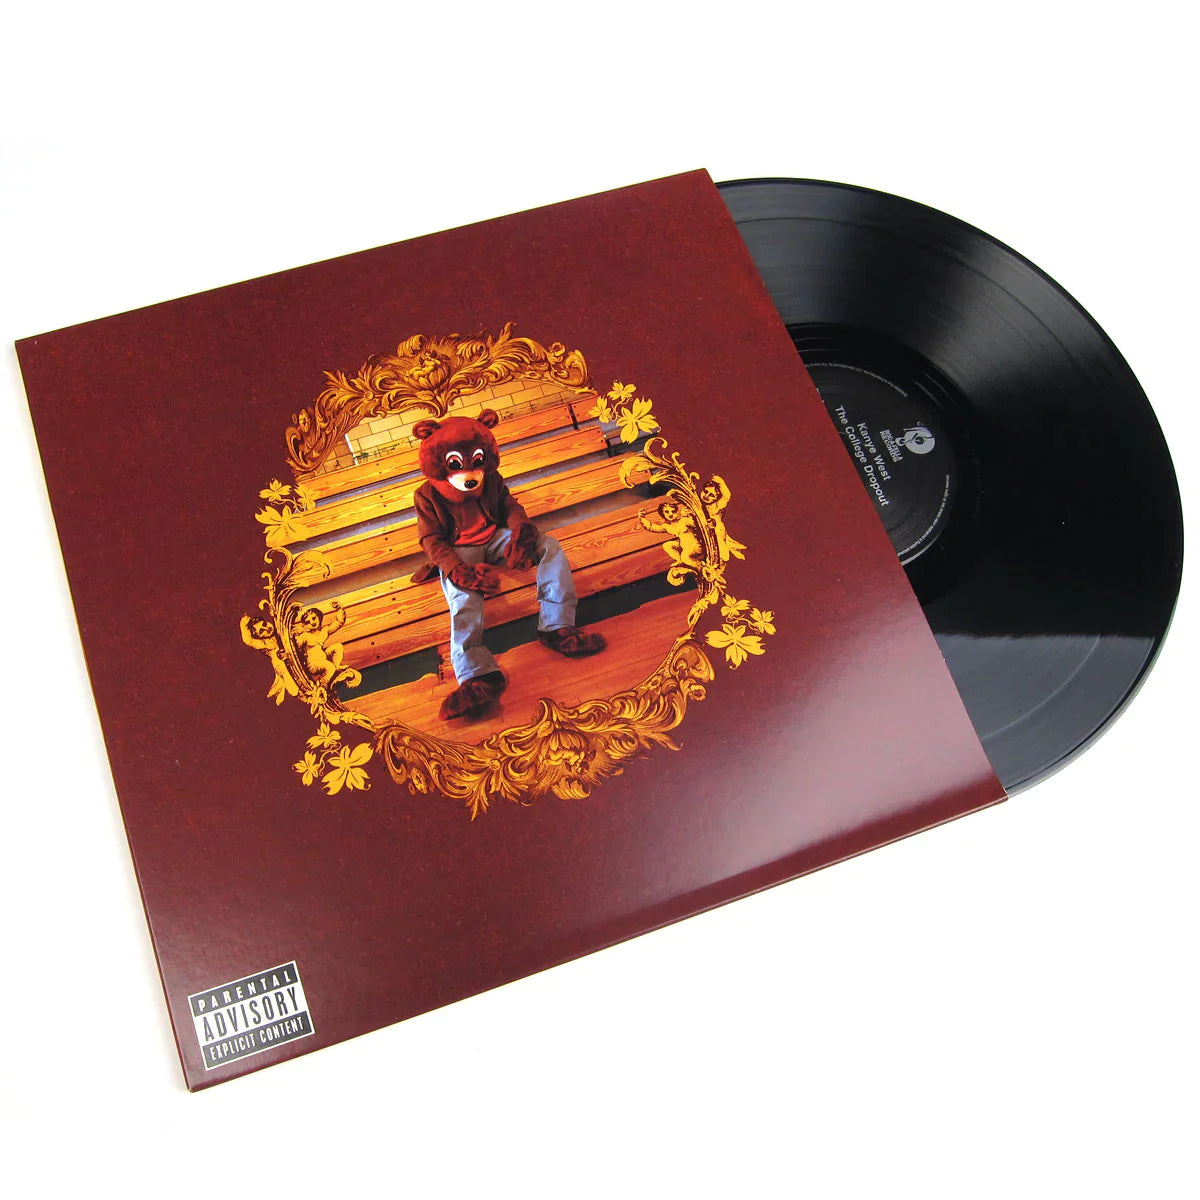 NEW/SEALED! Kanye West - College Dropout